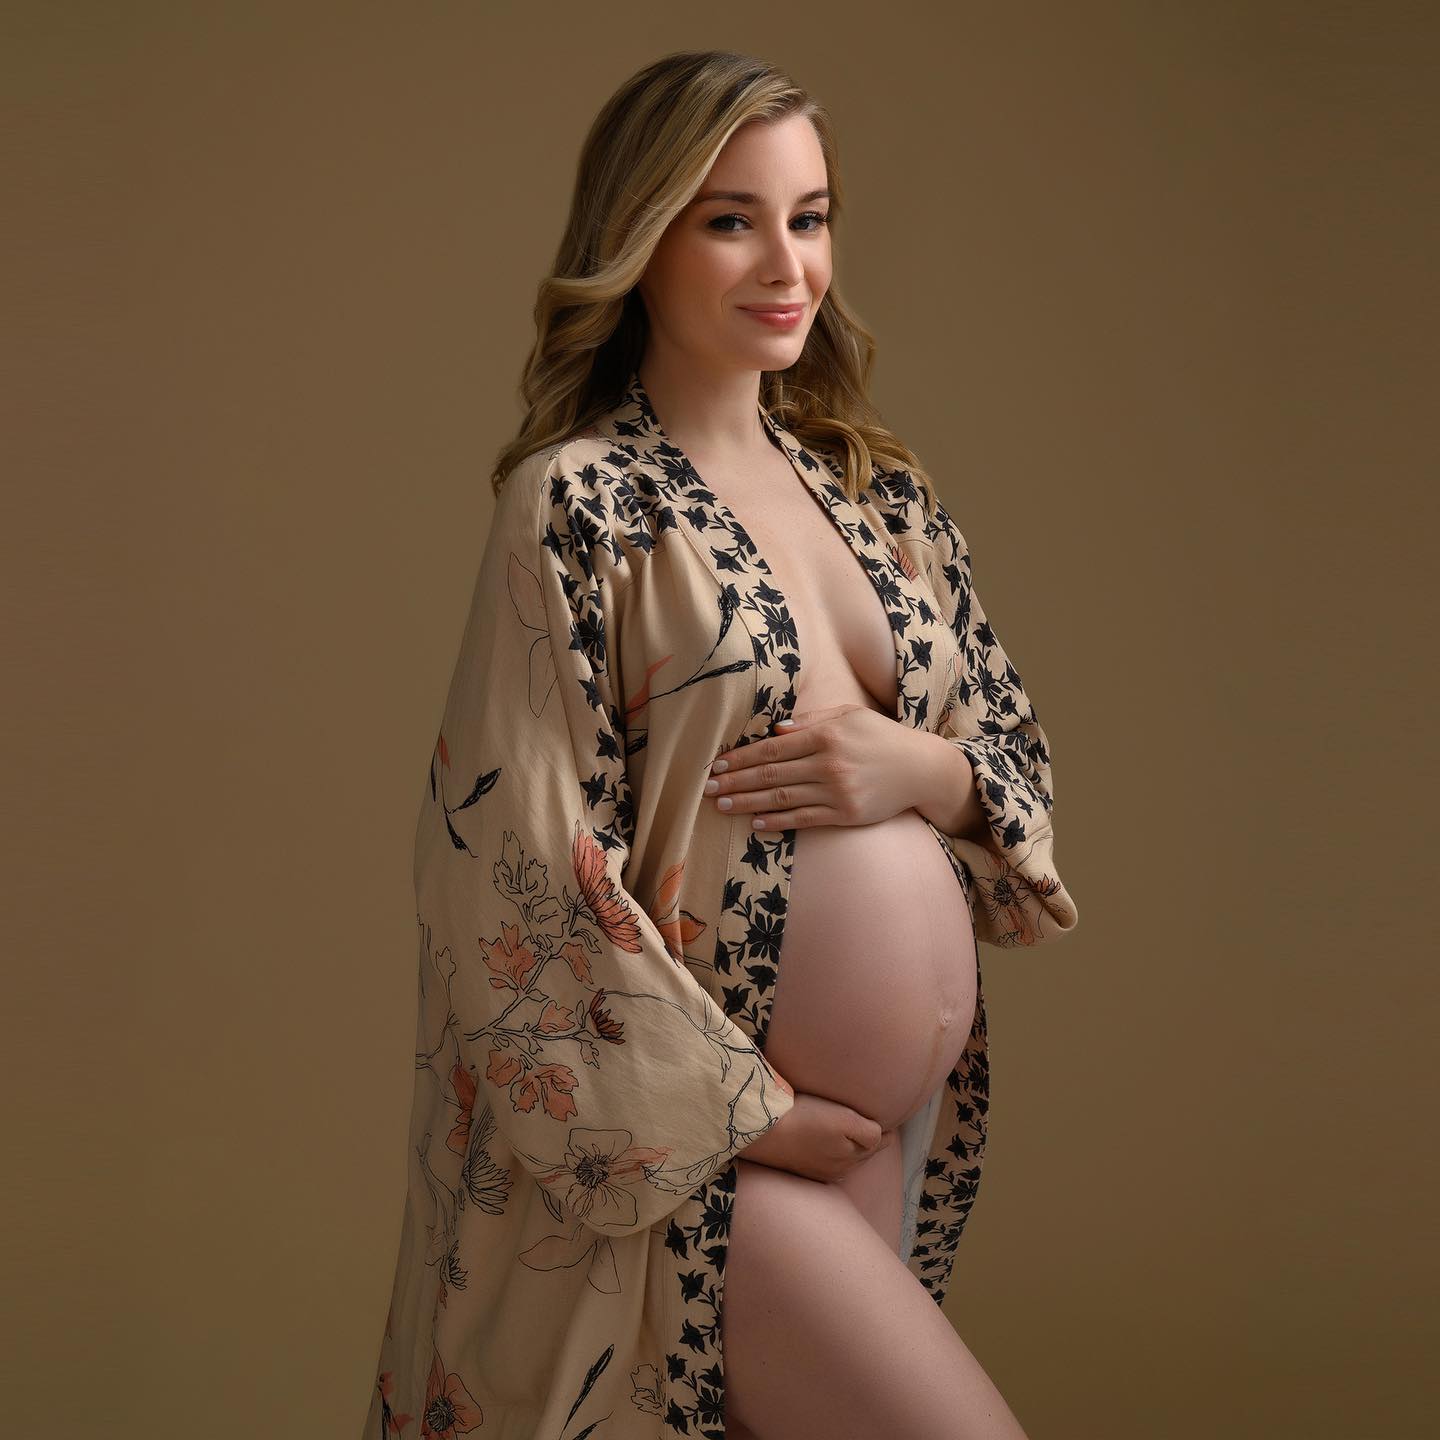 Pregnant woman weating a kimono posing in brown background. 